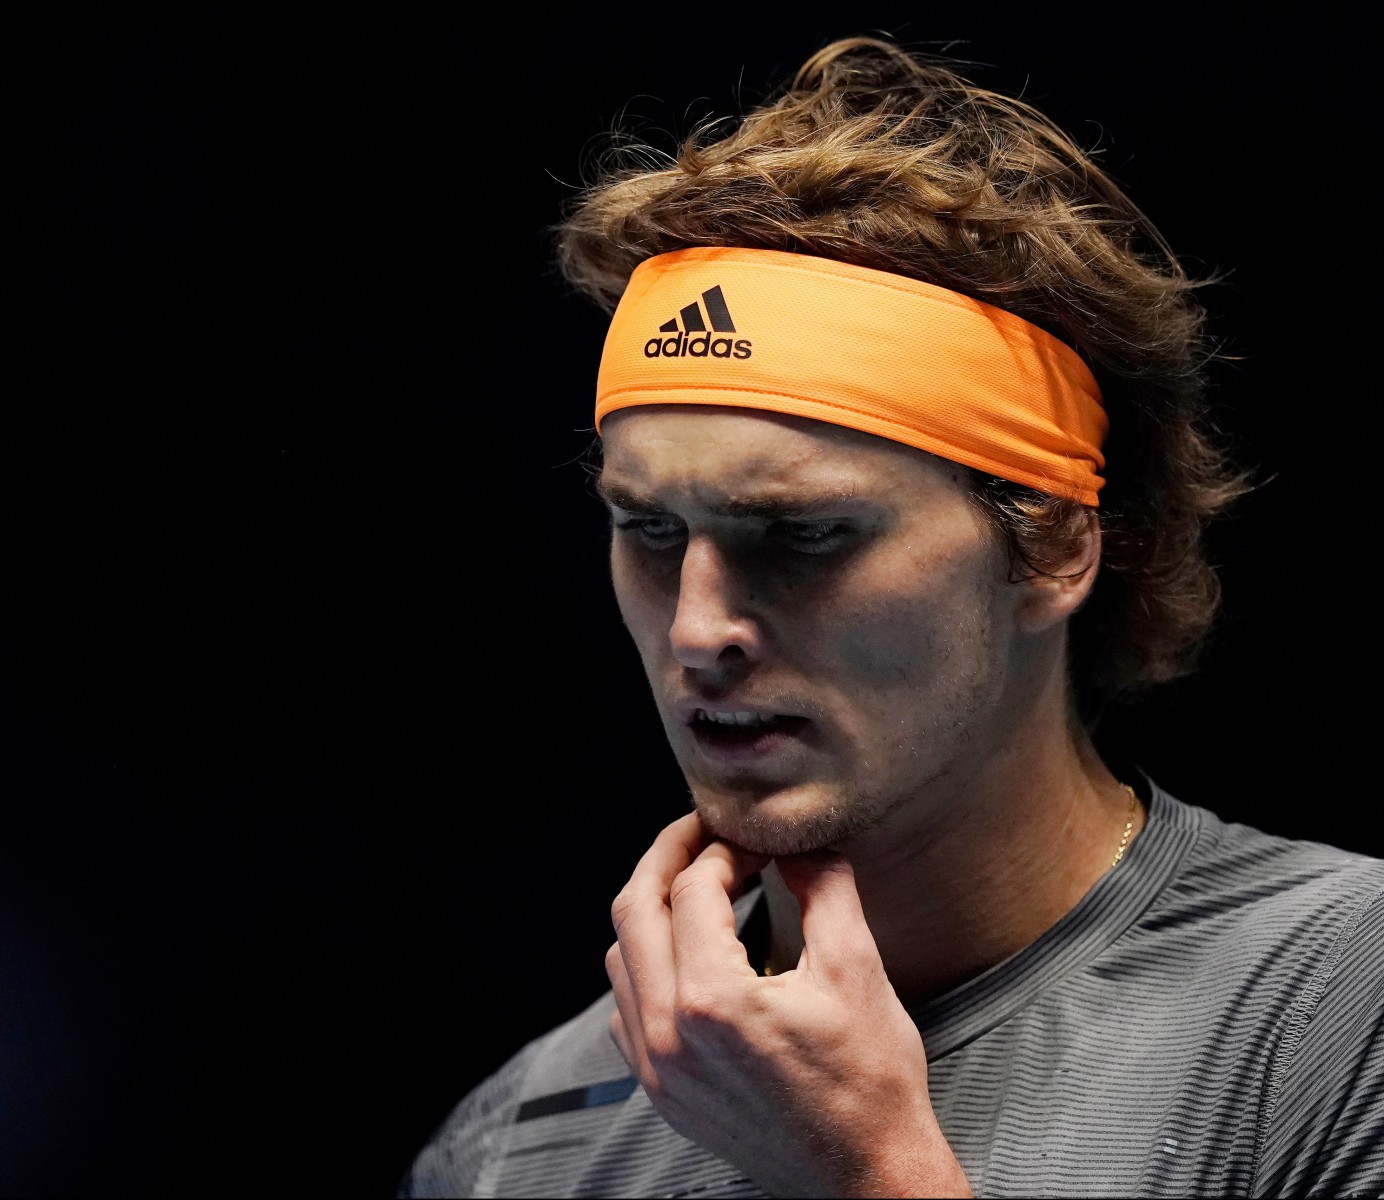 Alexander Zverev decided not to play for Germany at the Davis Cup and then agreed to fly out to play Federer instead